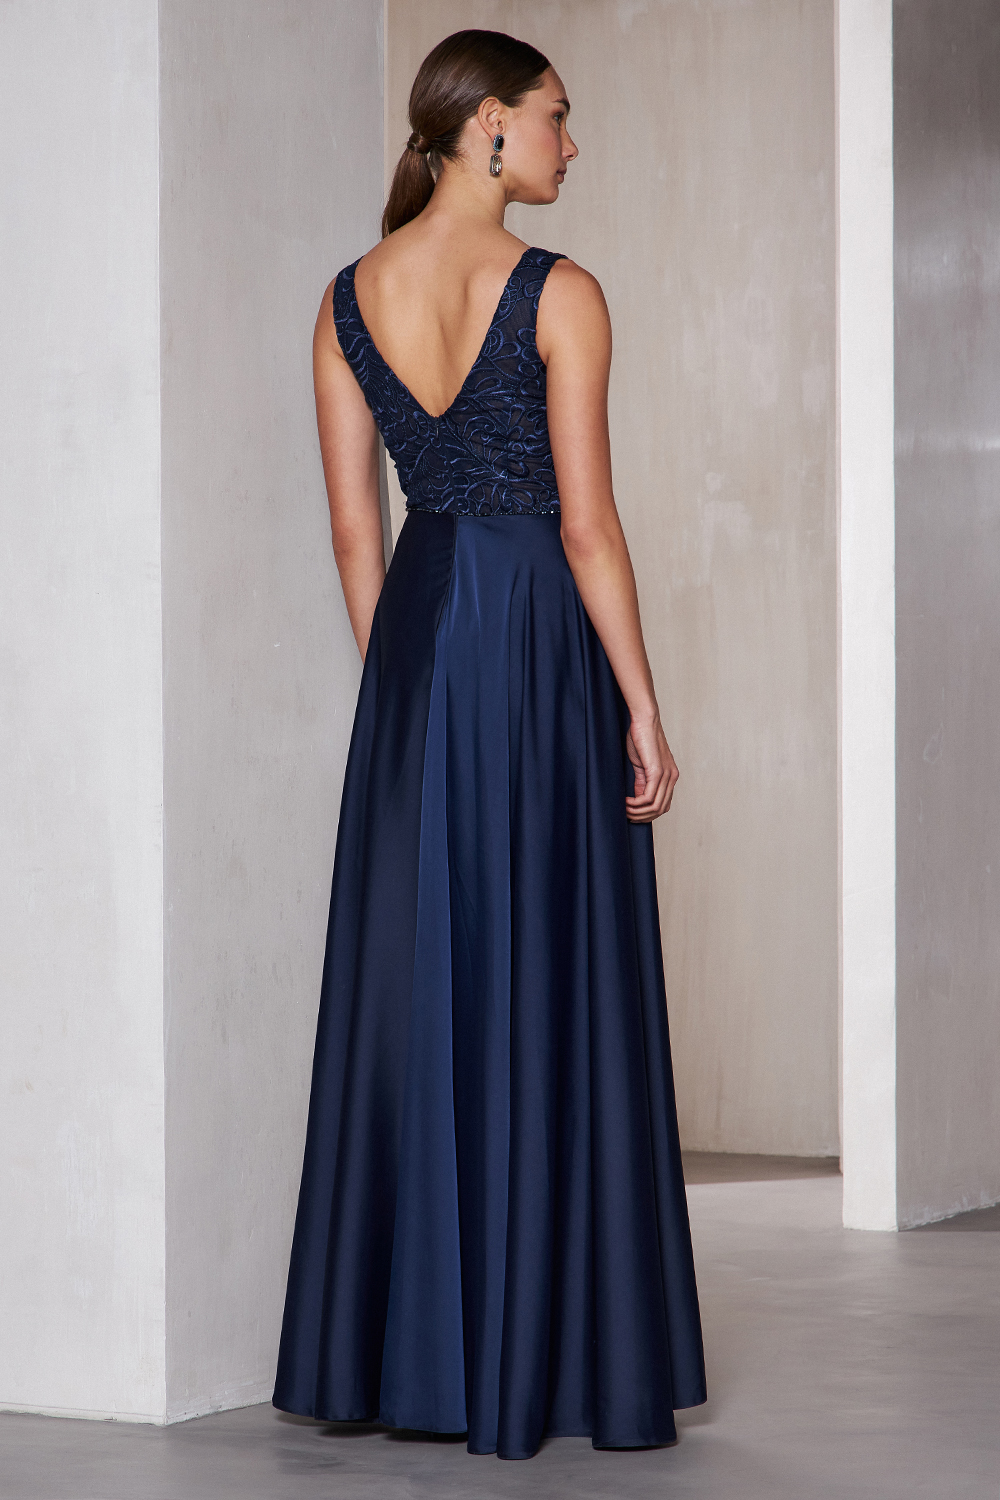 Evening Dresses / Long evening satin dress with lace top and bow at the waist